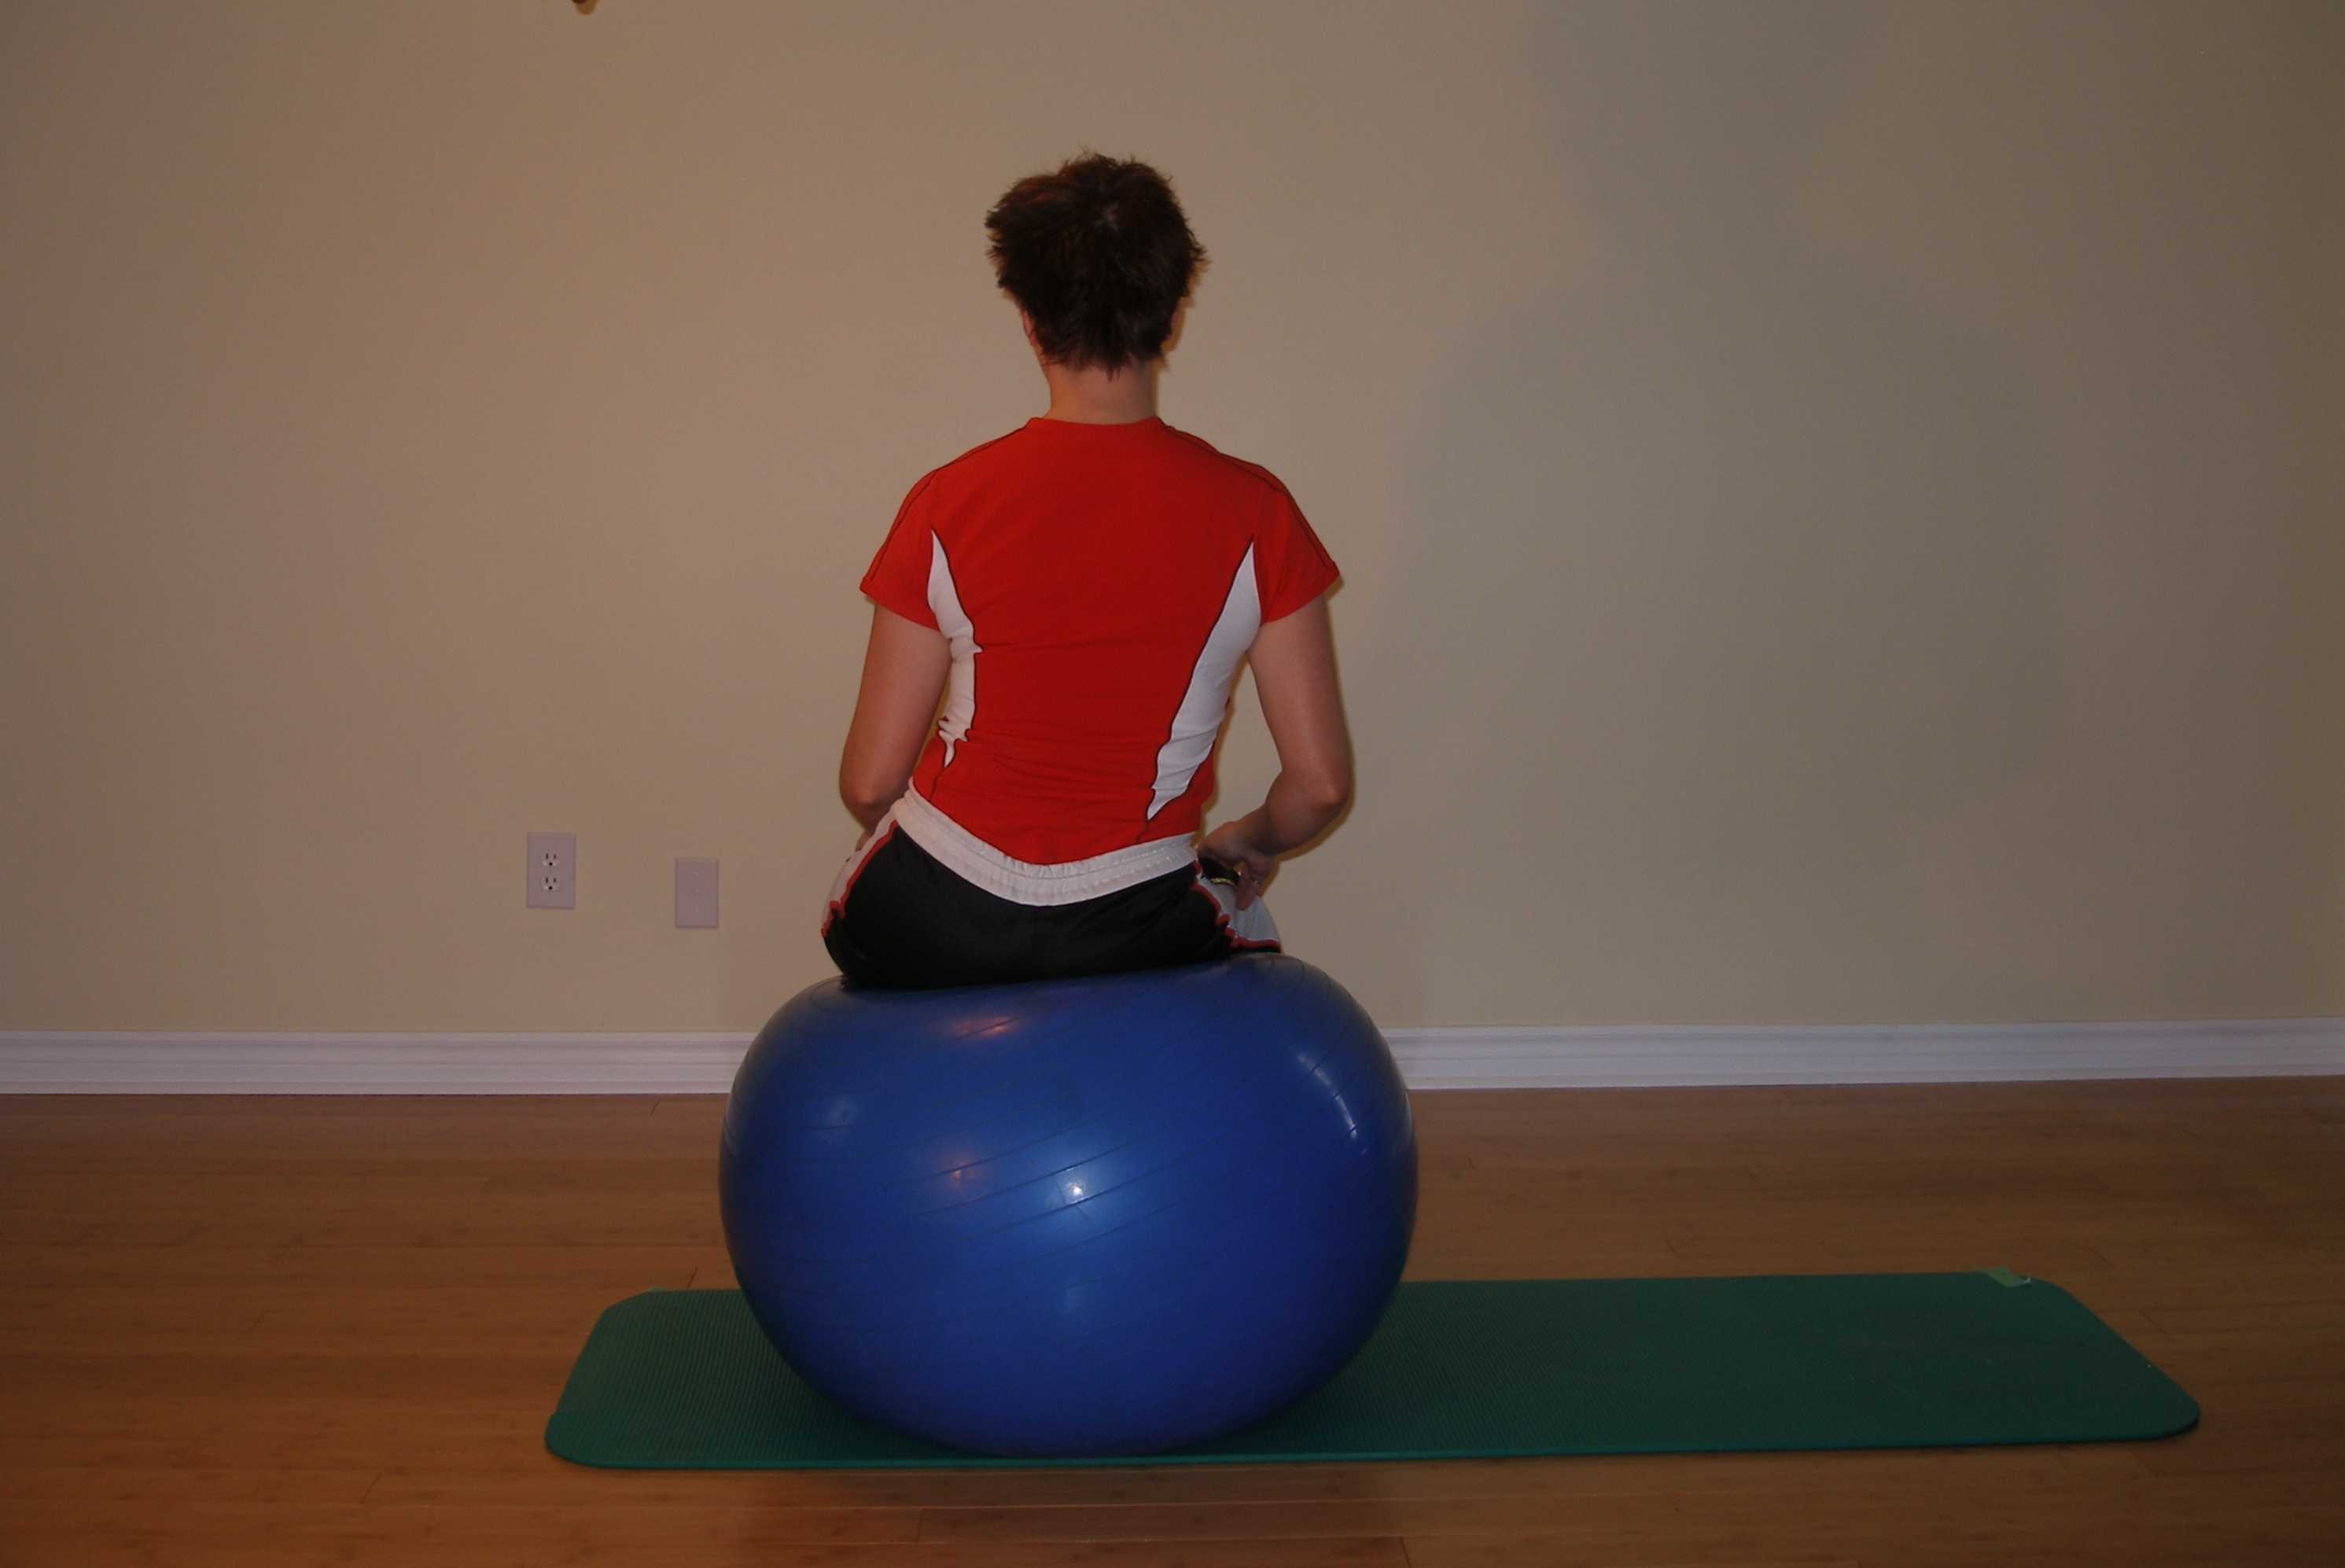 Pelvic Lateral Shift on the Exercise Ball